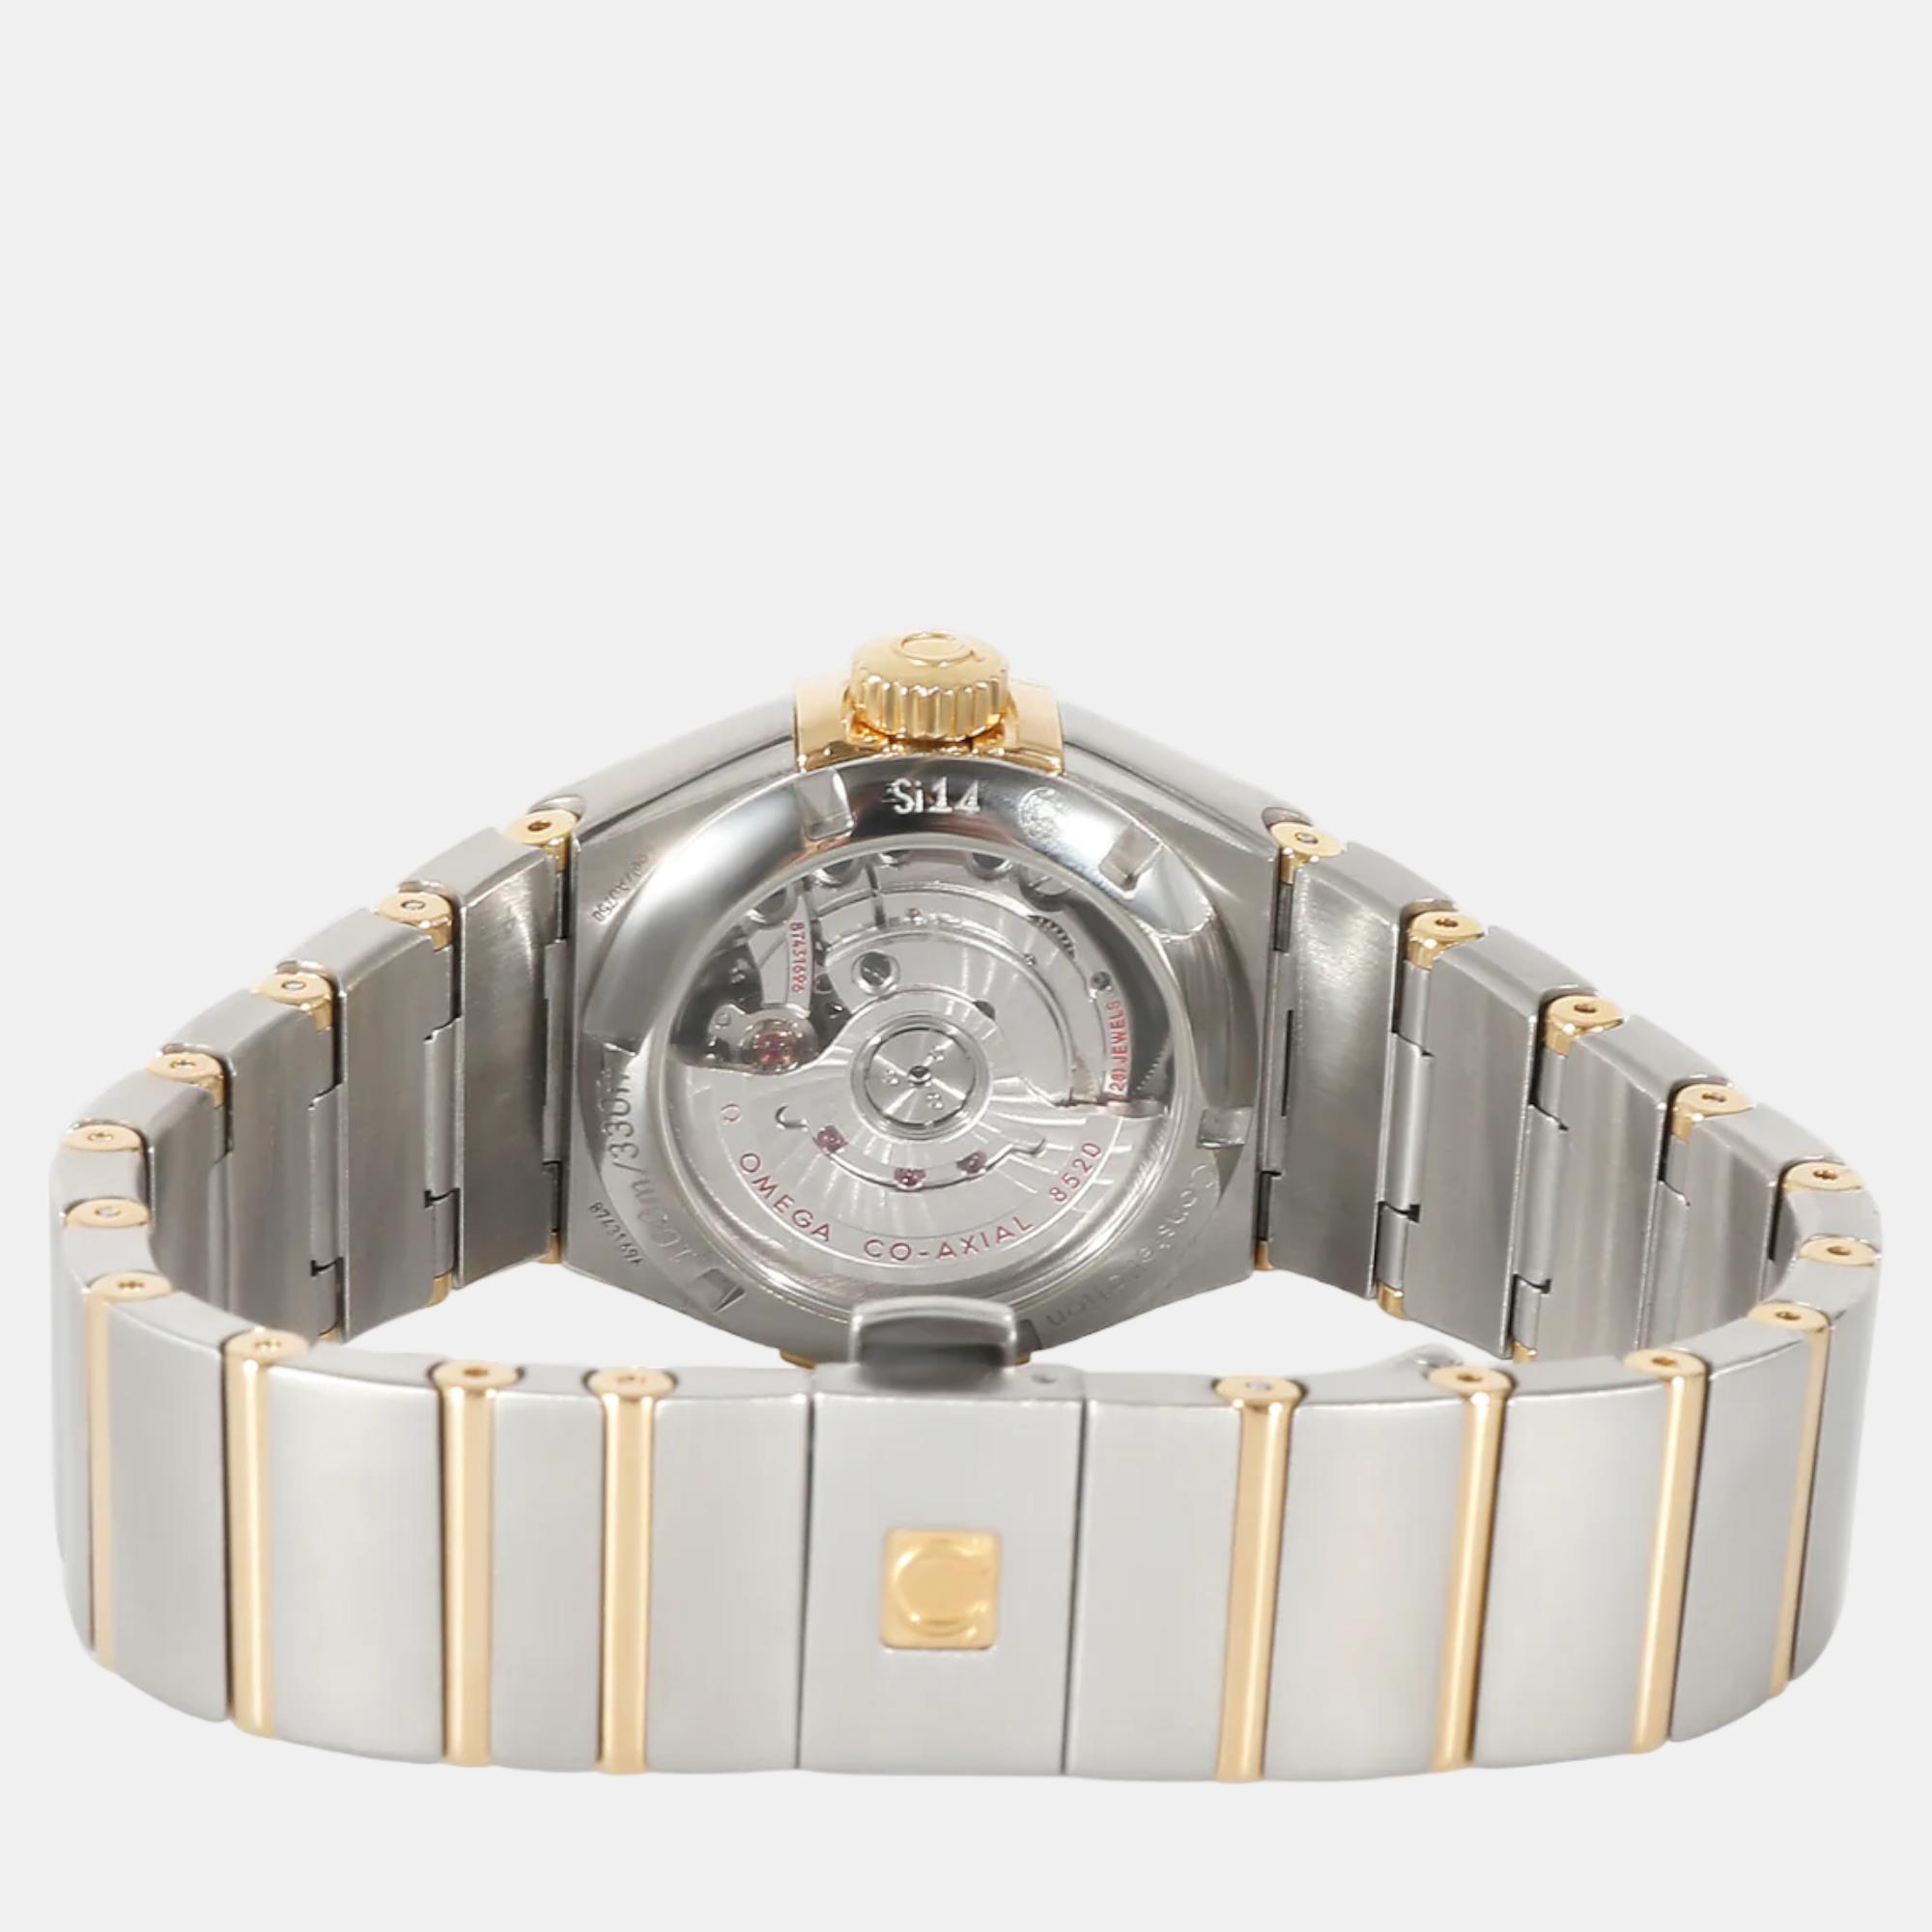 Omega Champagne Diamonds 18K Yellow Gold And Stainless Steel Constellation 123.20.27.20.58.001 Women's Wristwatch 27 Mm